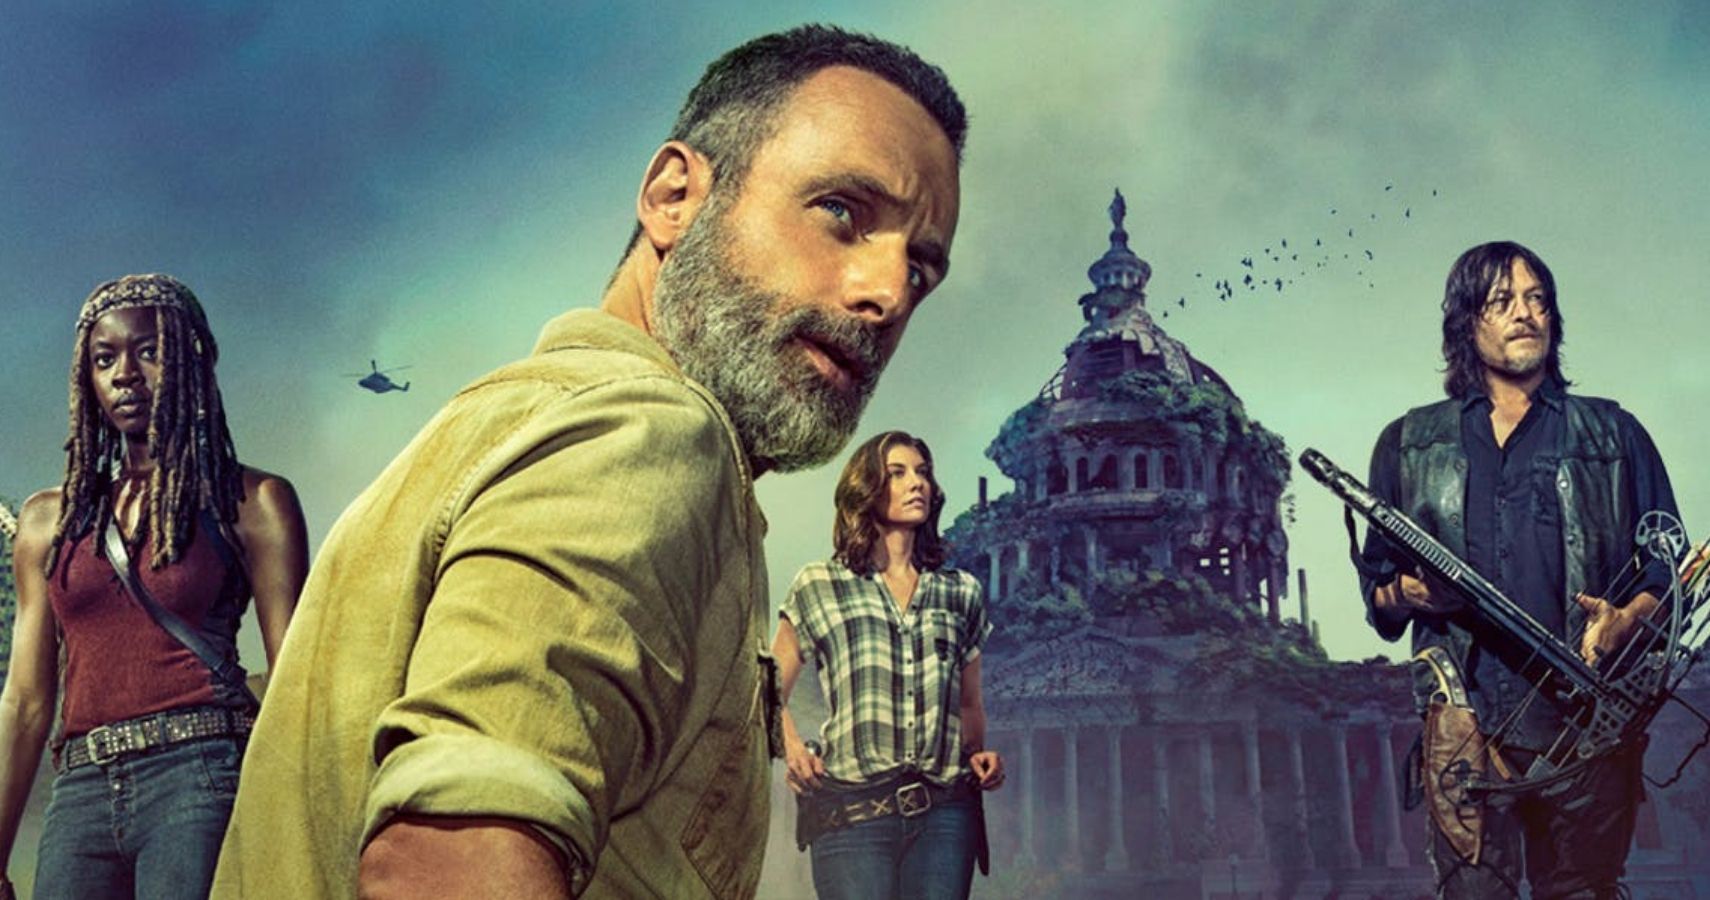 5 Things The Walking Dead TV Series Does Better Than The Comics (And 5 Things The Comics Do Better)